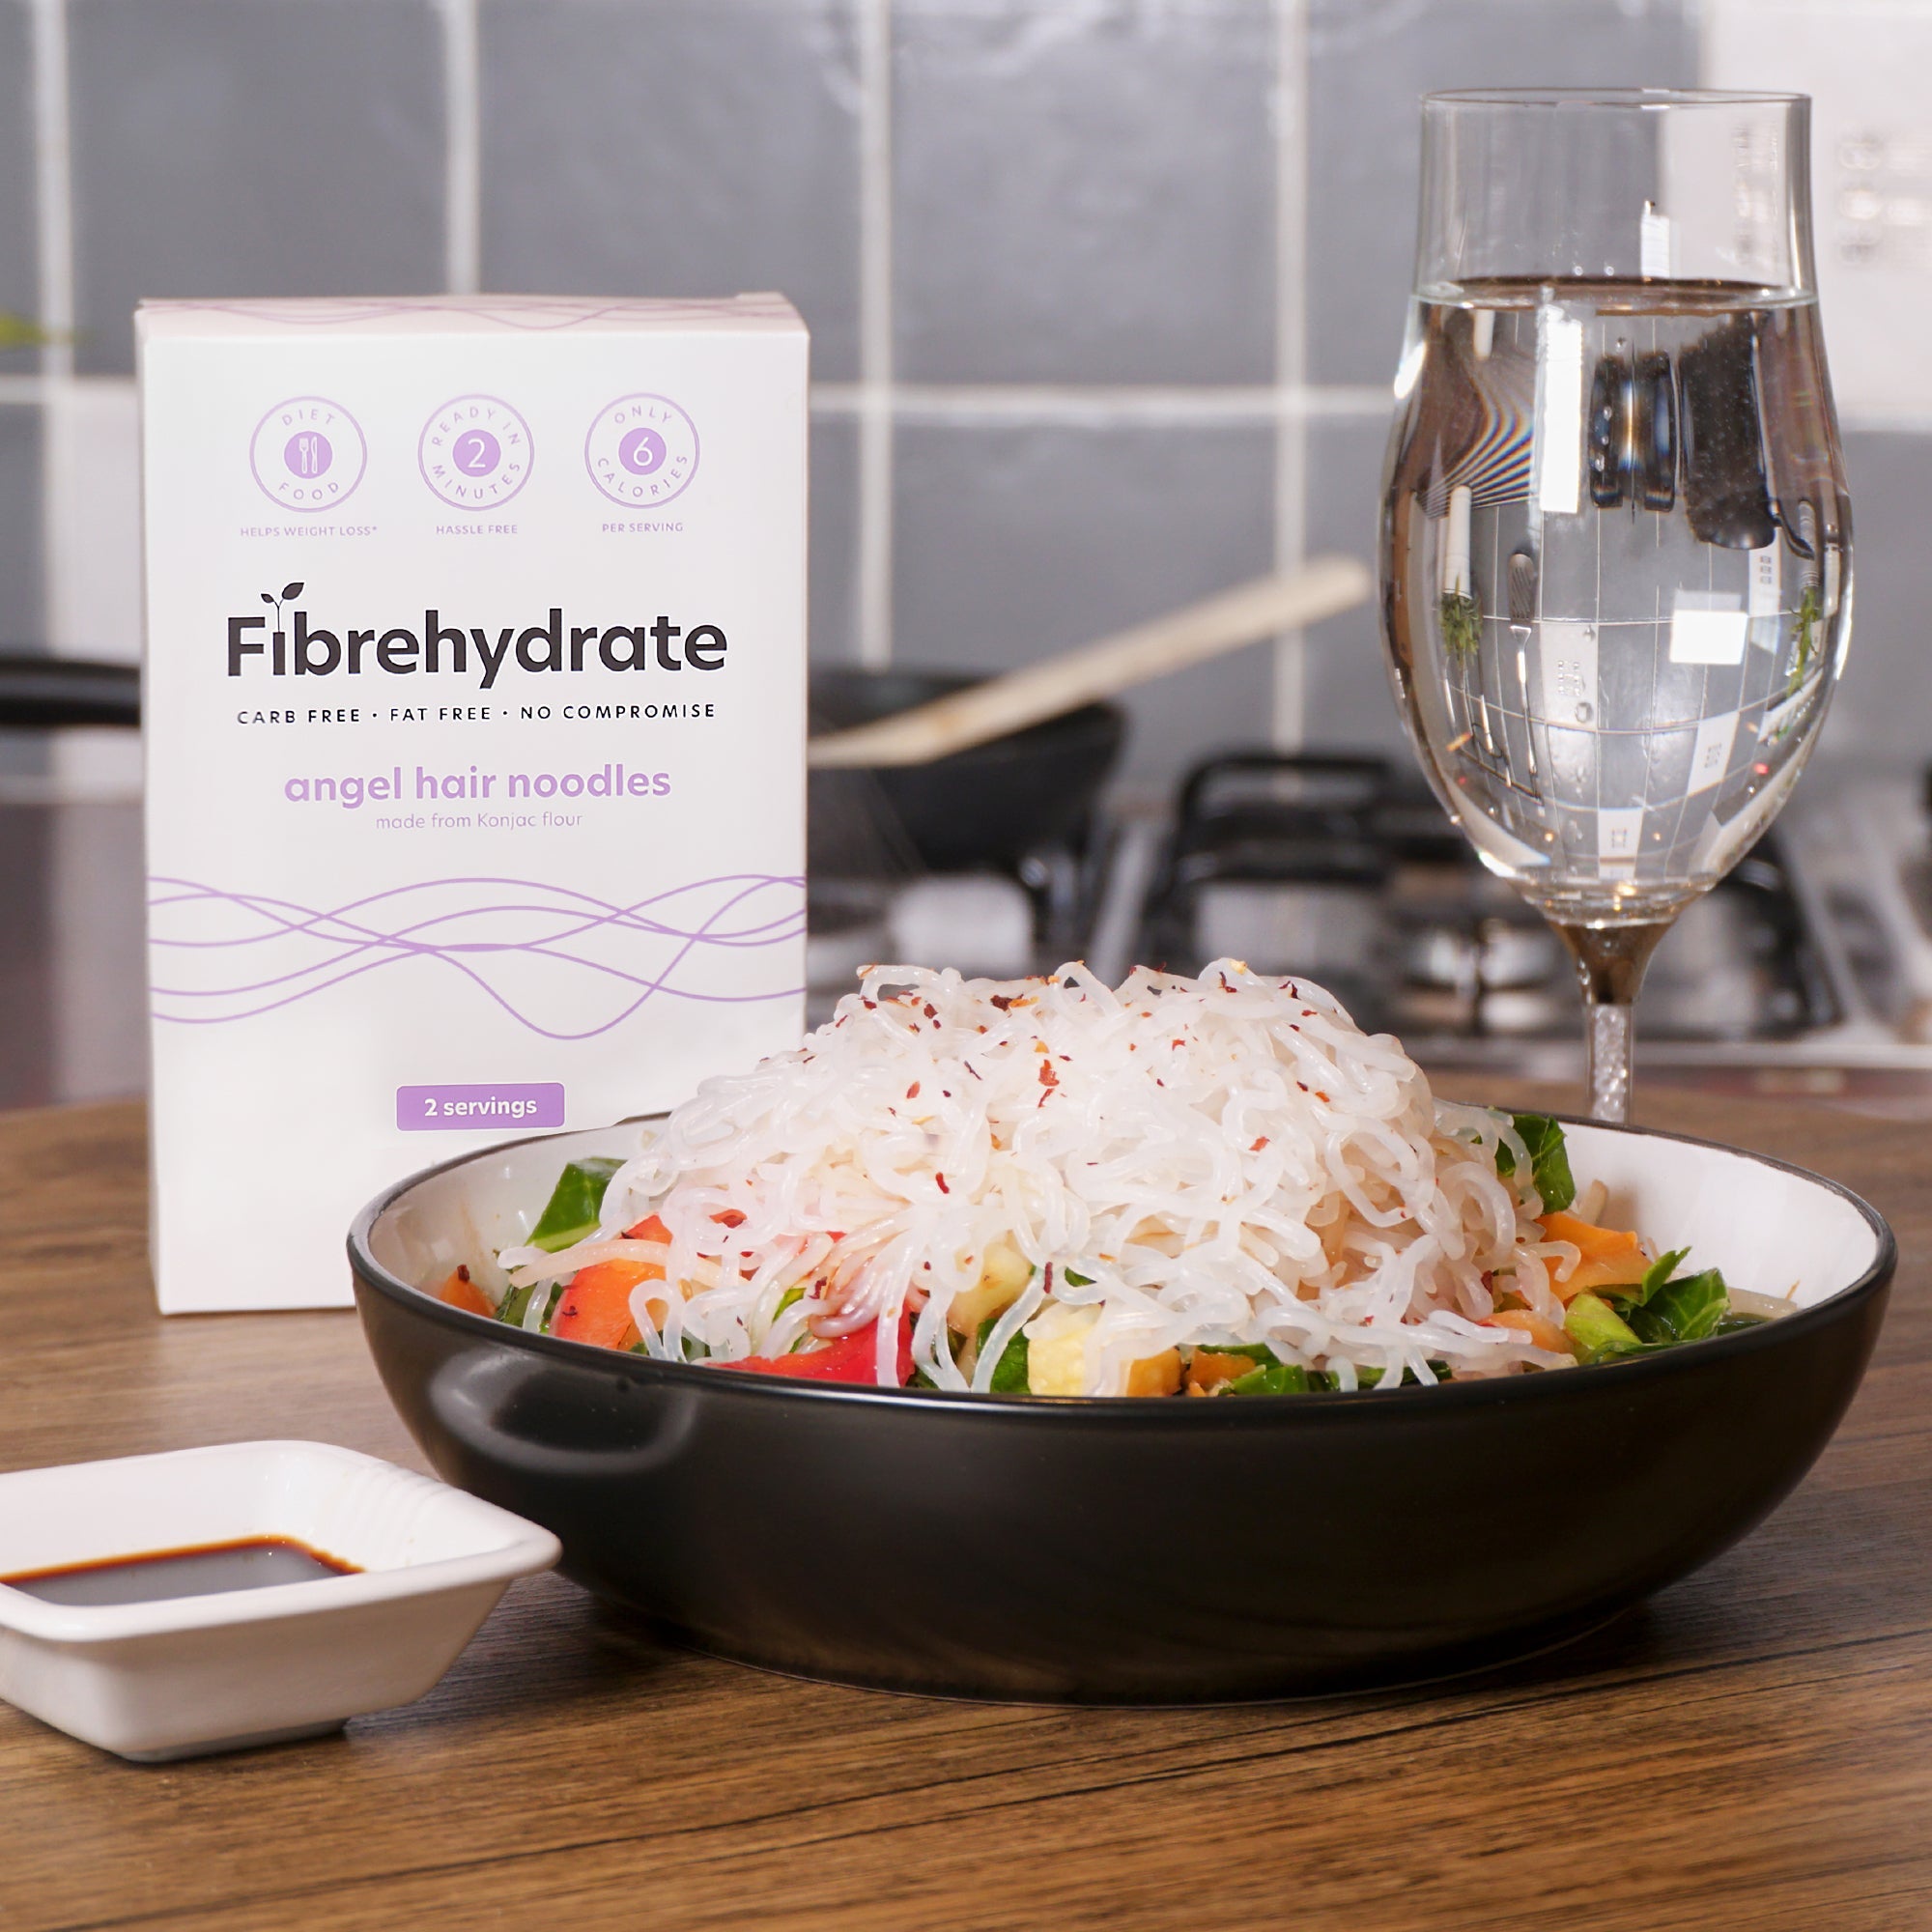 Fibrehydrate Angel Hair Noodles